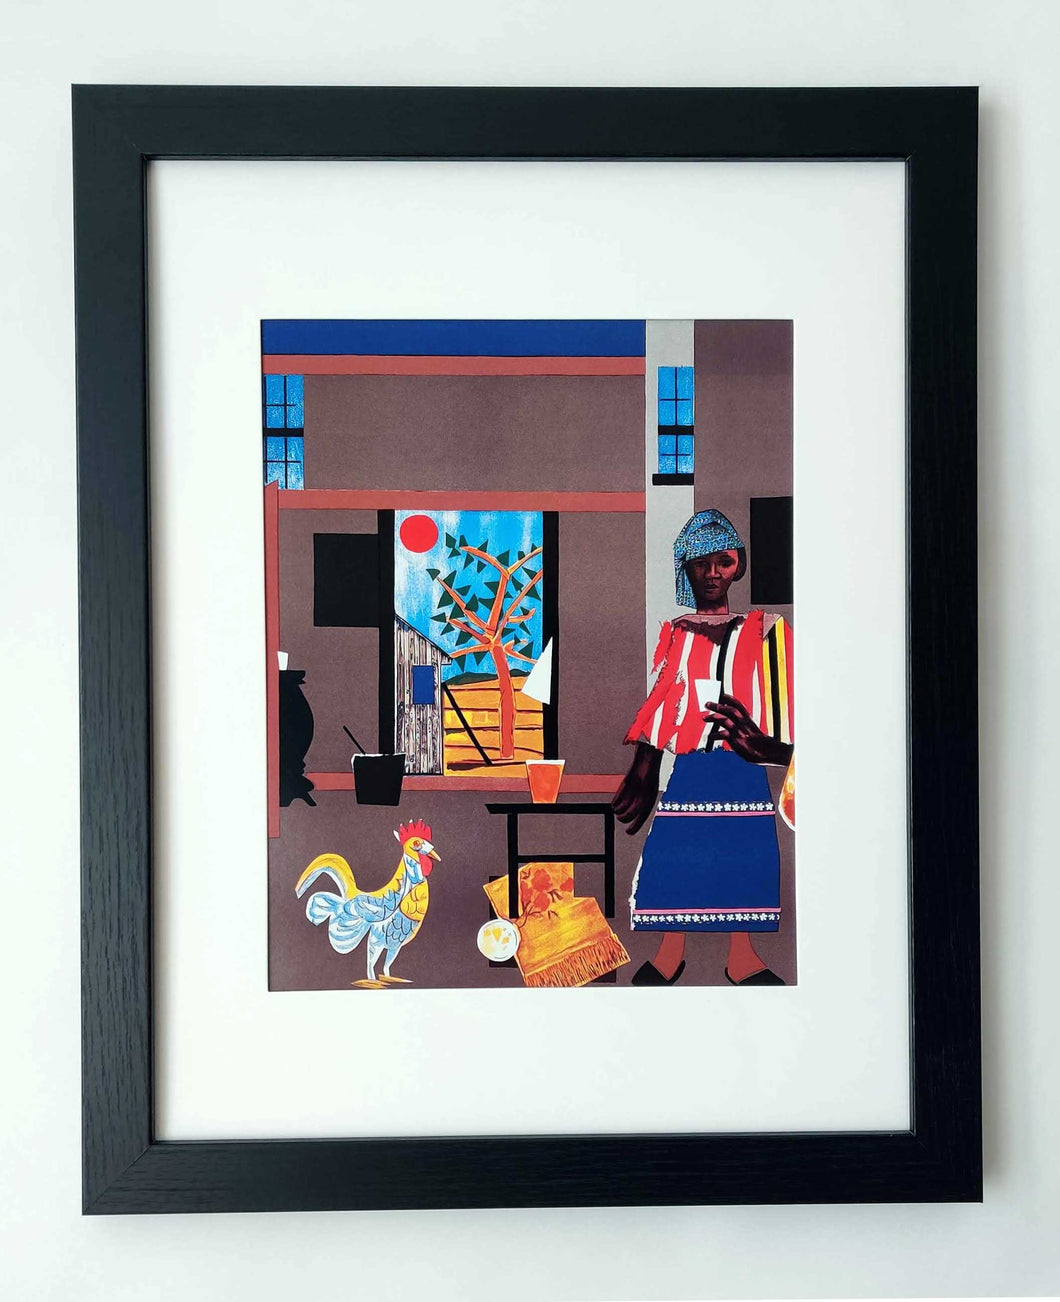 Morning of the Rooster by Romare Bearden - Framed Print 11x14